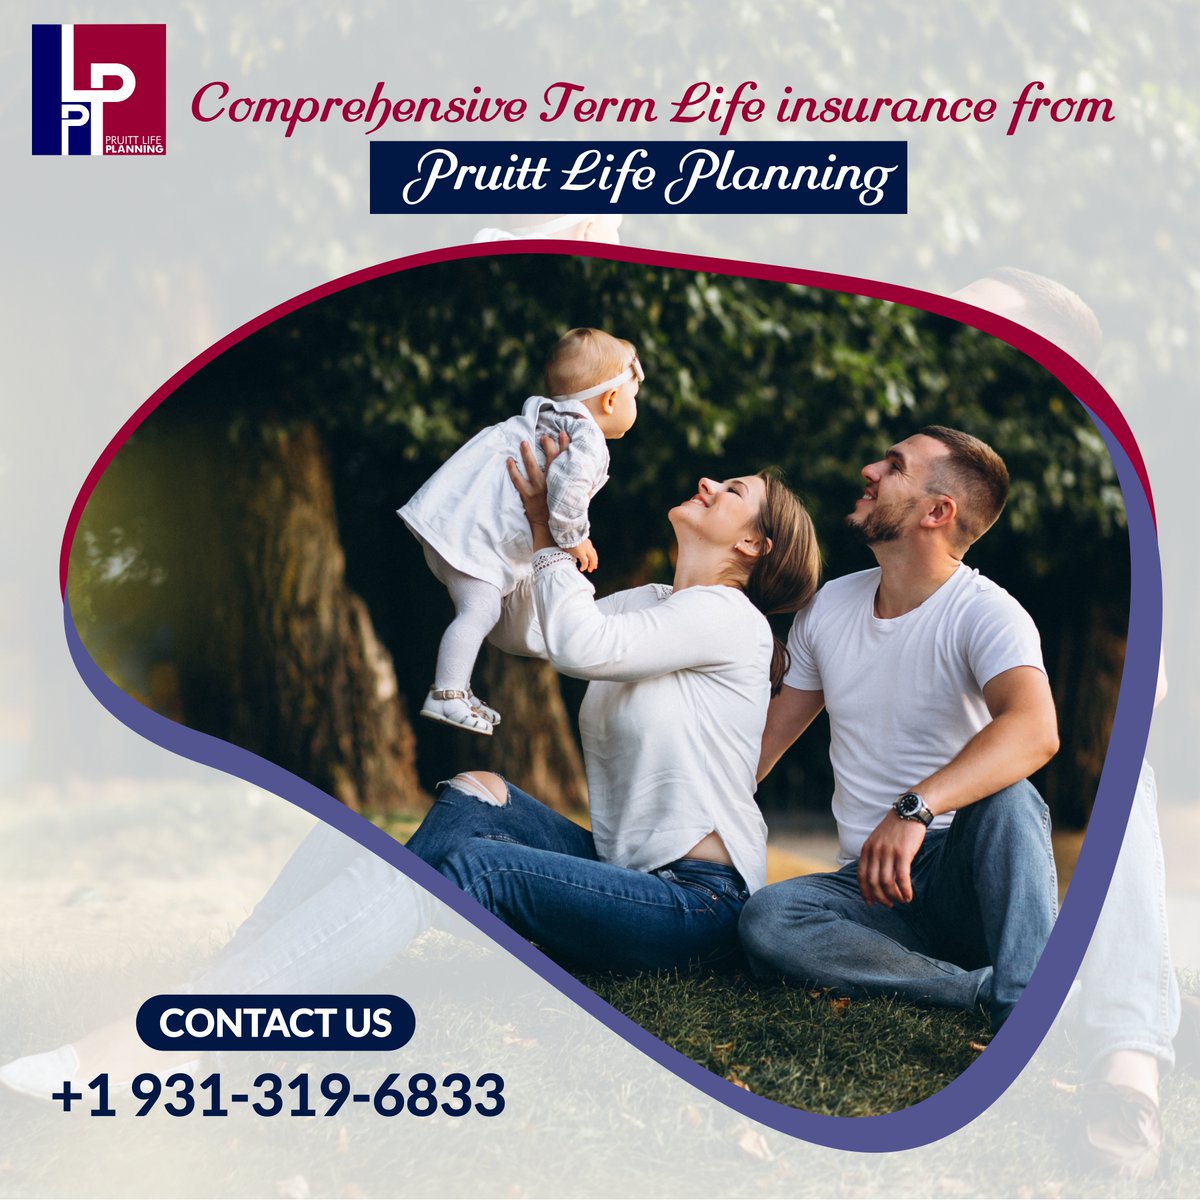 Secure your family's future with comprehensive term life insurance from Pruitt Life Planning. Rest easy knowing you've made the right choice for their protection.

Call Us On +1 931-319-6833

#PruittLifePlanning #TermLifeInsurance #FamilySecurity #FinancialProtection